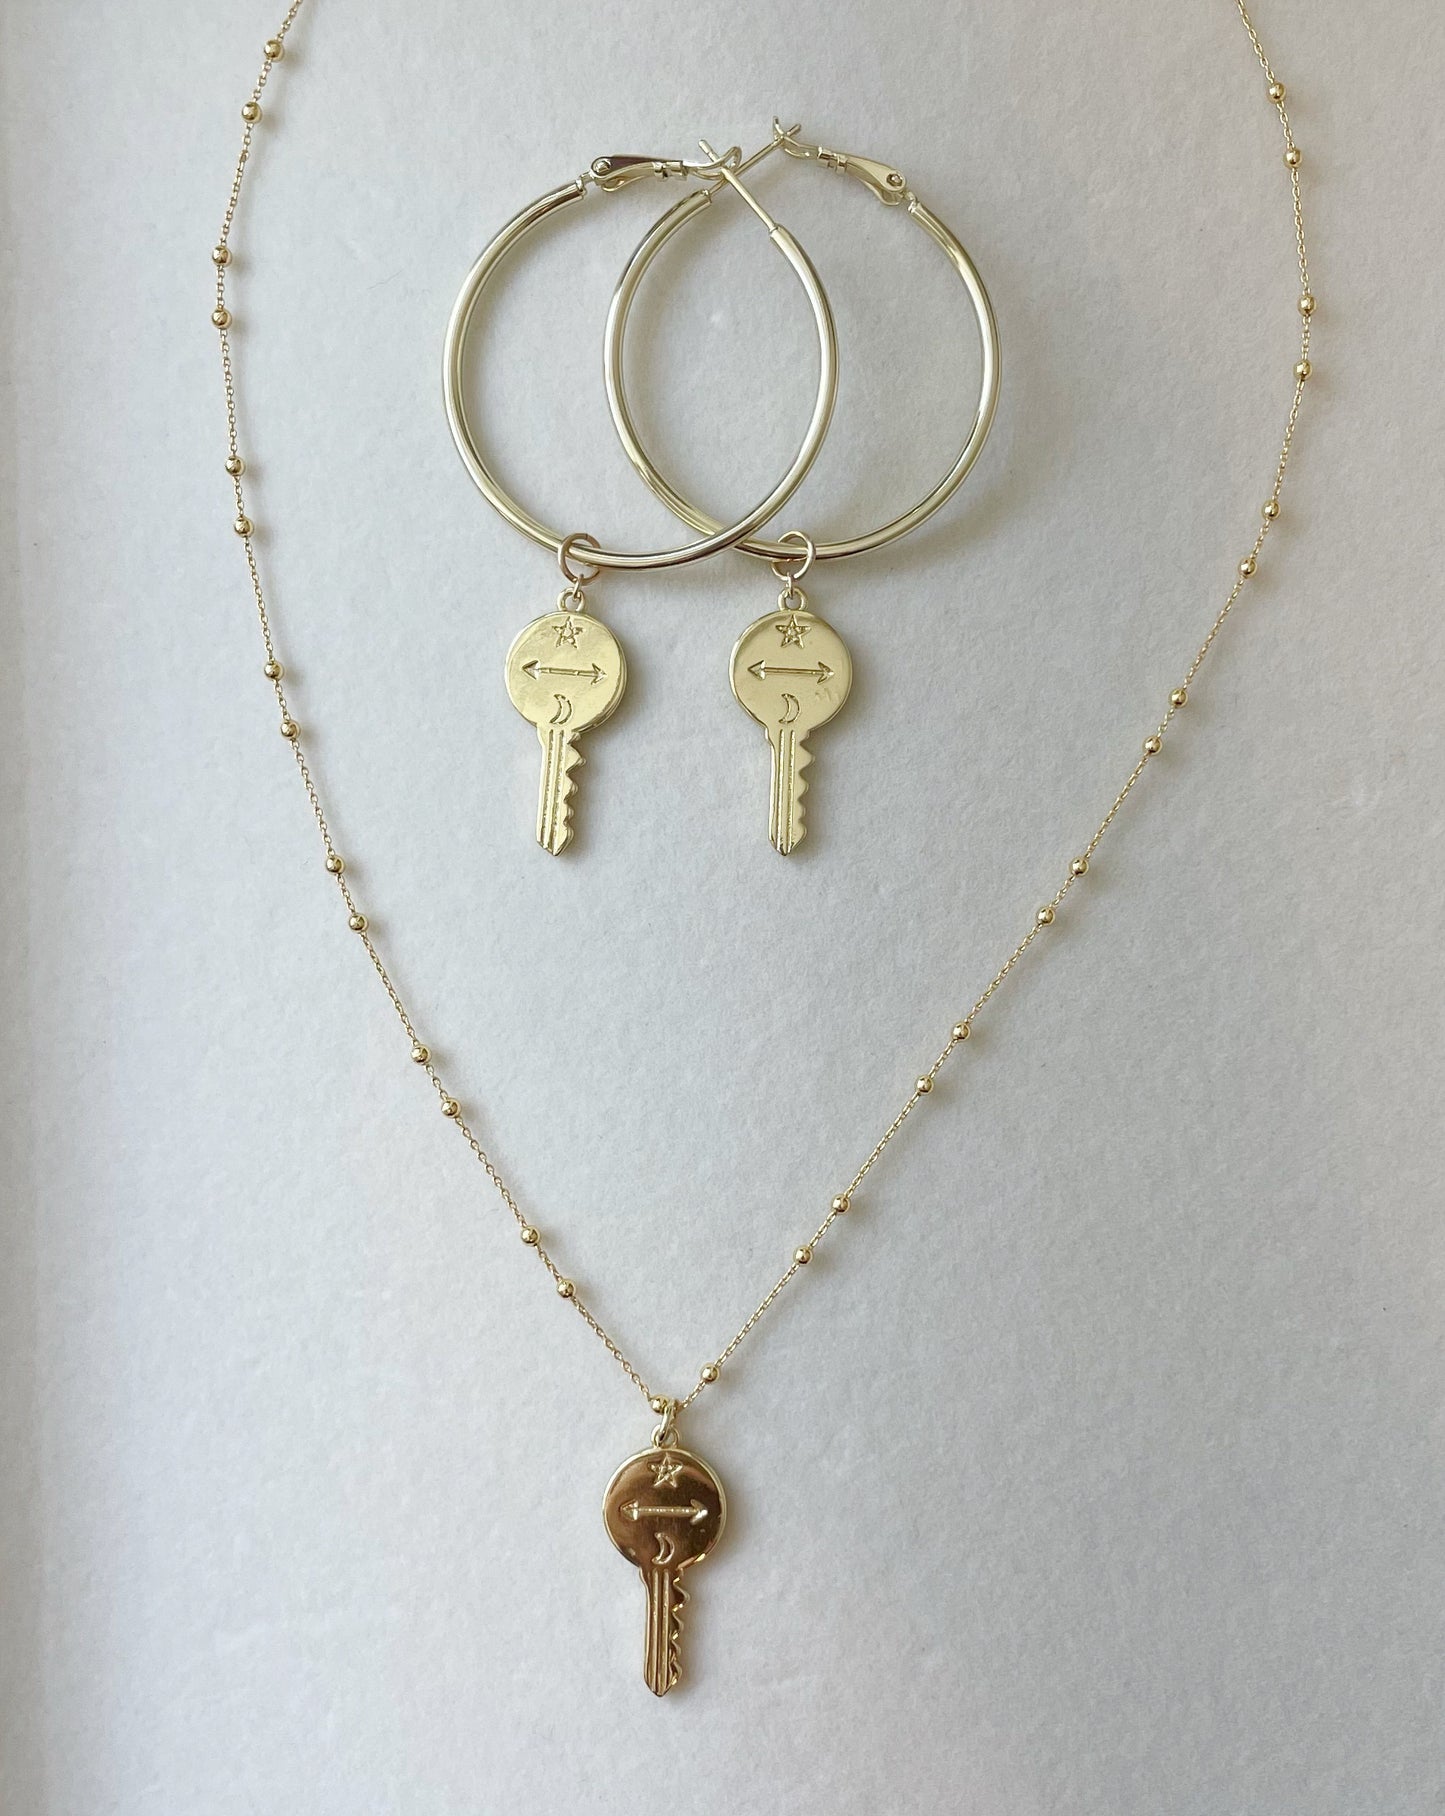 Free Your Mind Gold Filled Key Charm Necklace